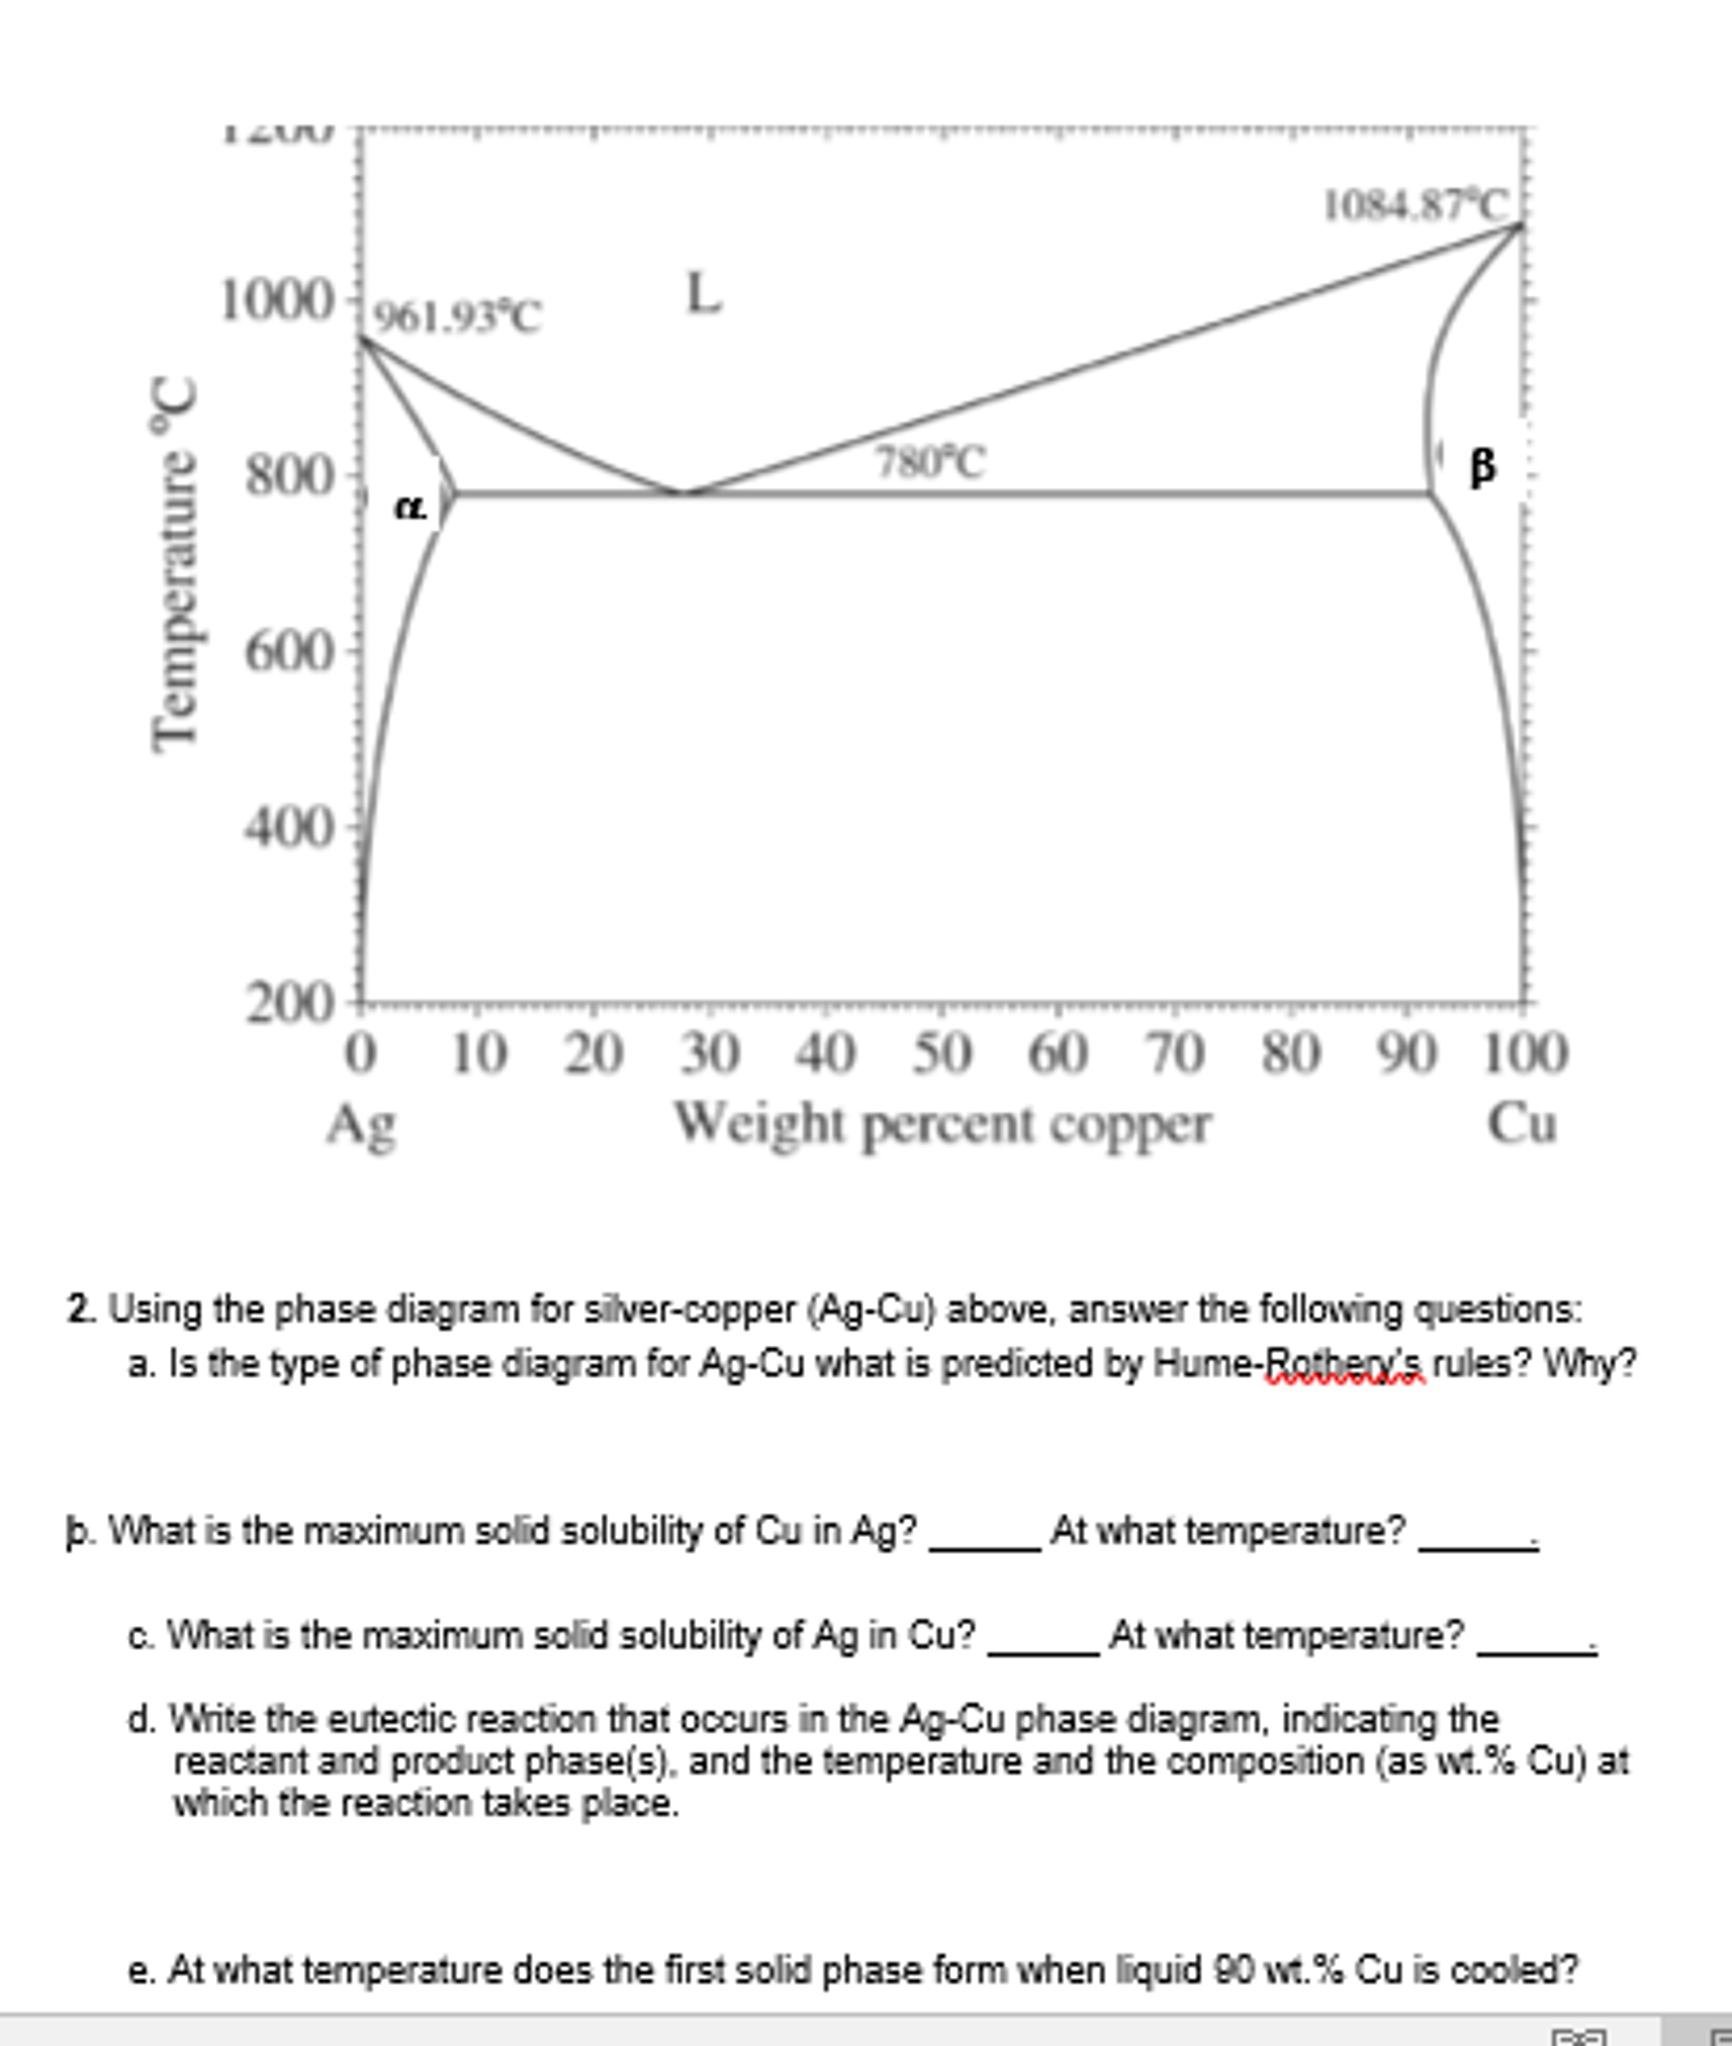 Copper Silver Phase Diagram Using The Phase Diagram For Silver Copper Ag Cu Chegg